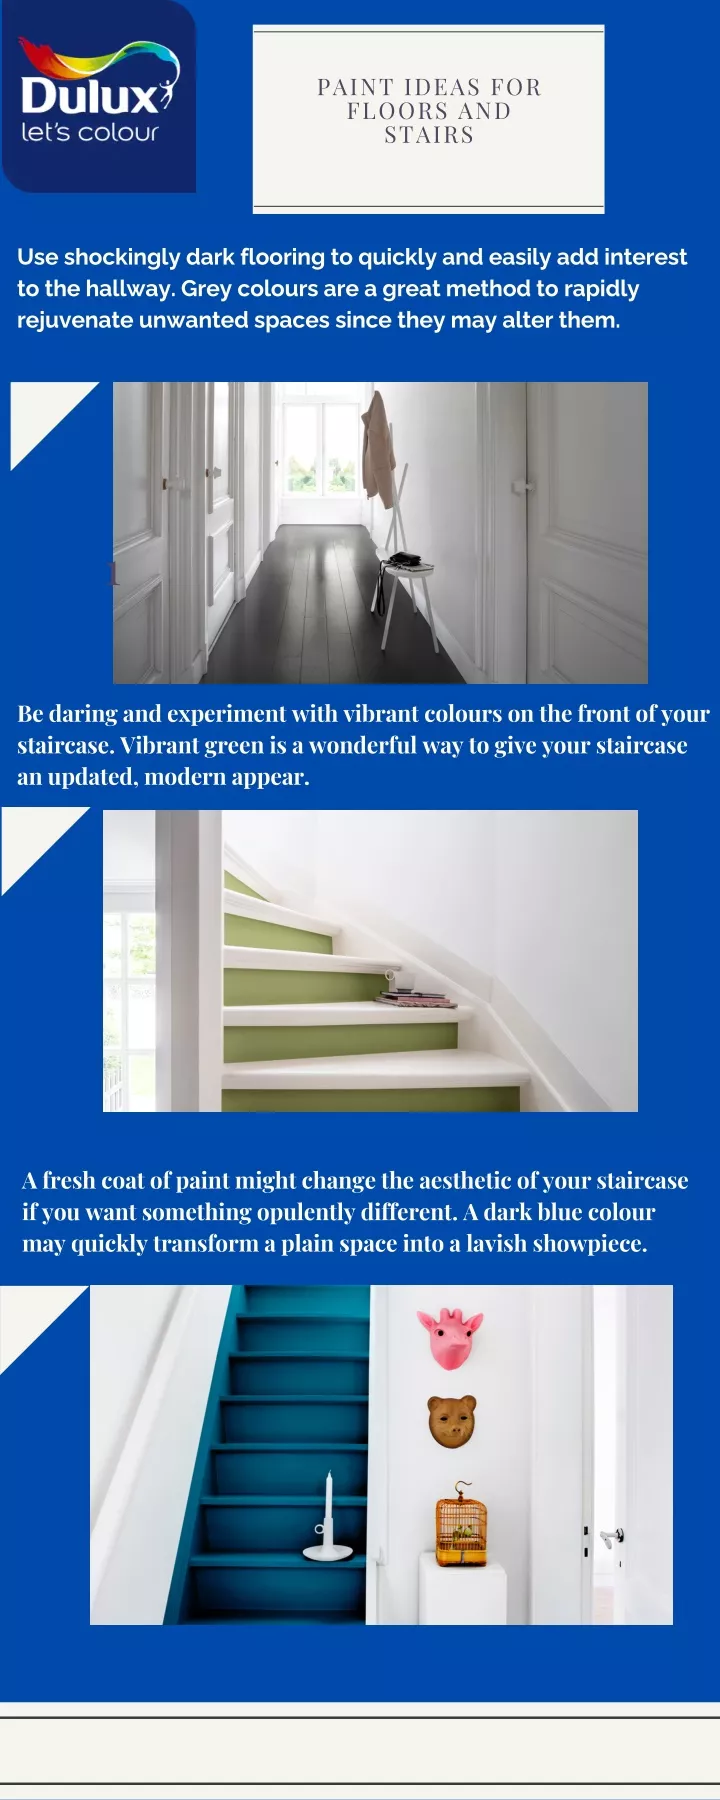 paint ideas for floors and stairs